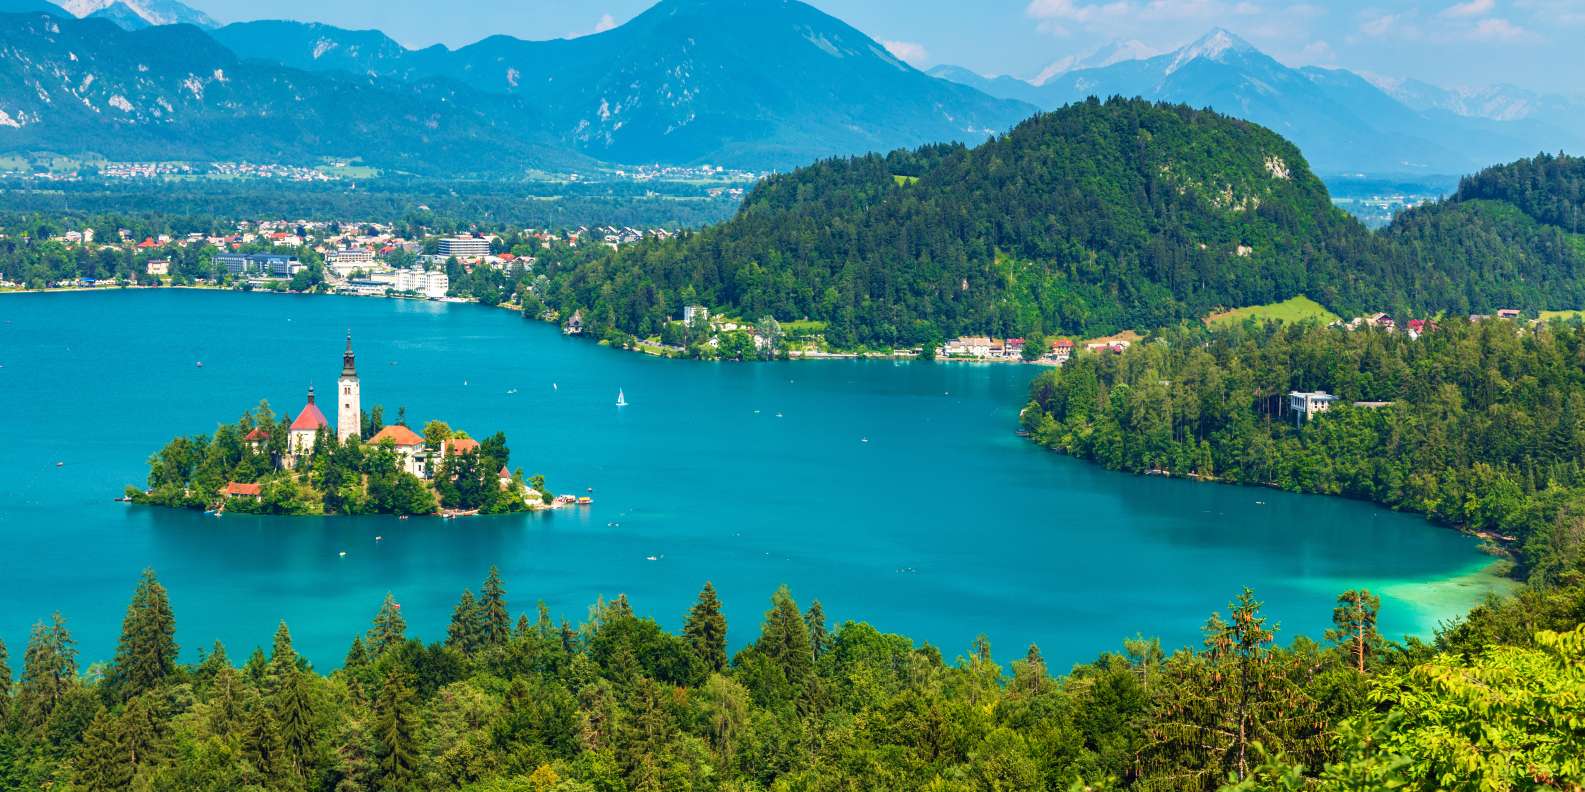 The BEST Bled Workshops & classes 2023 FREE Cancellation GetYourGuide